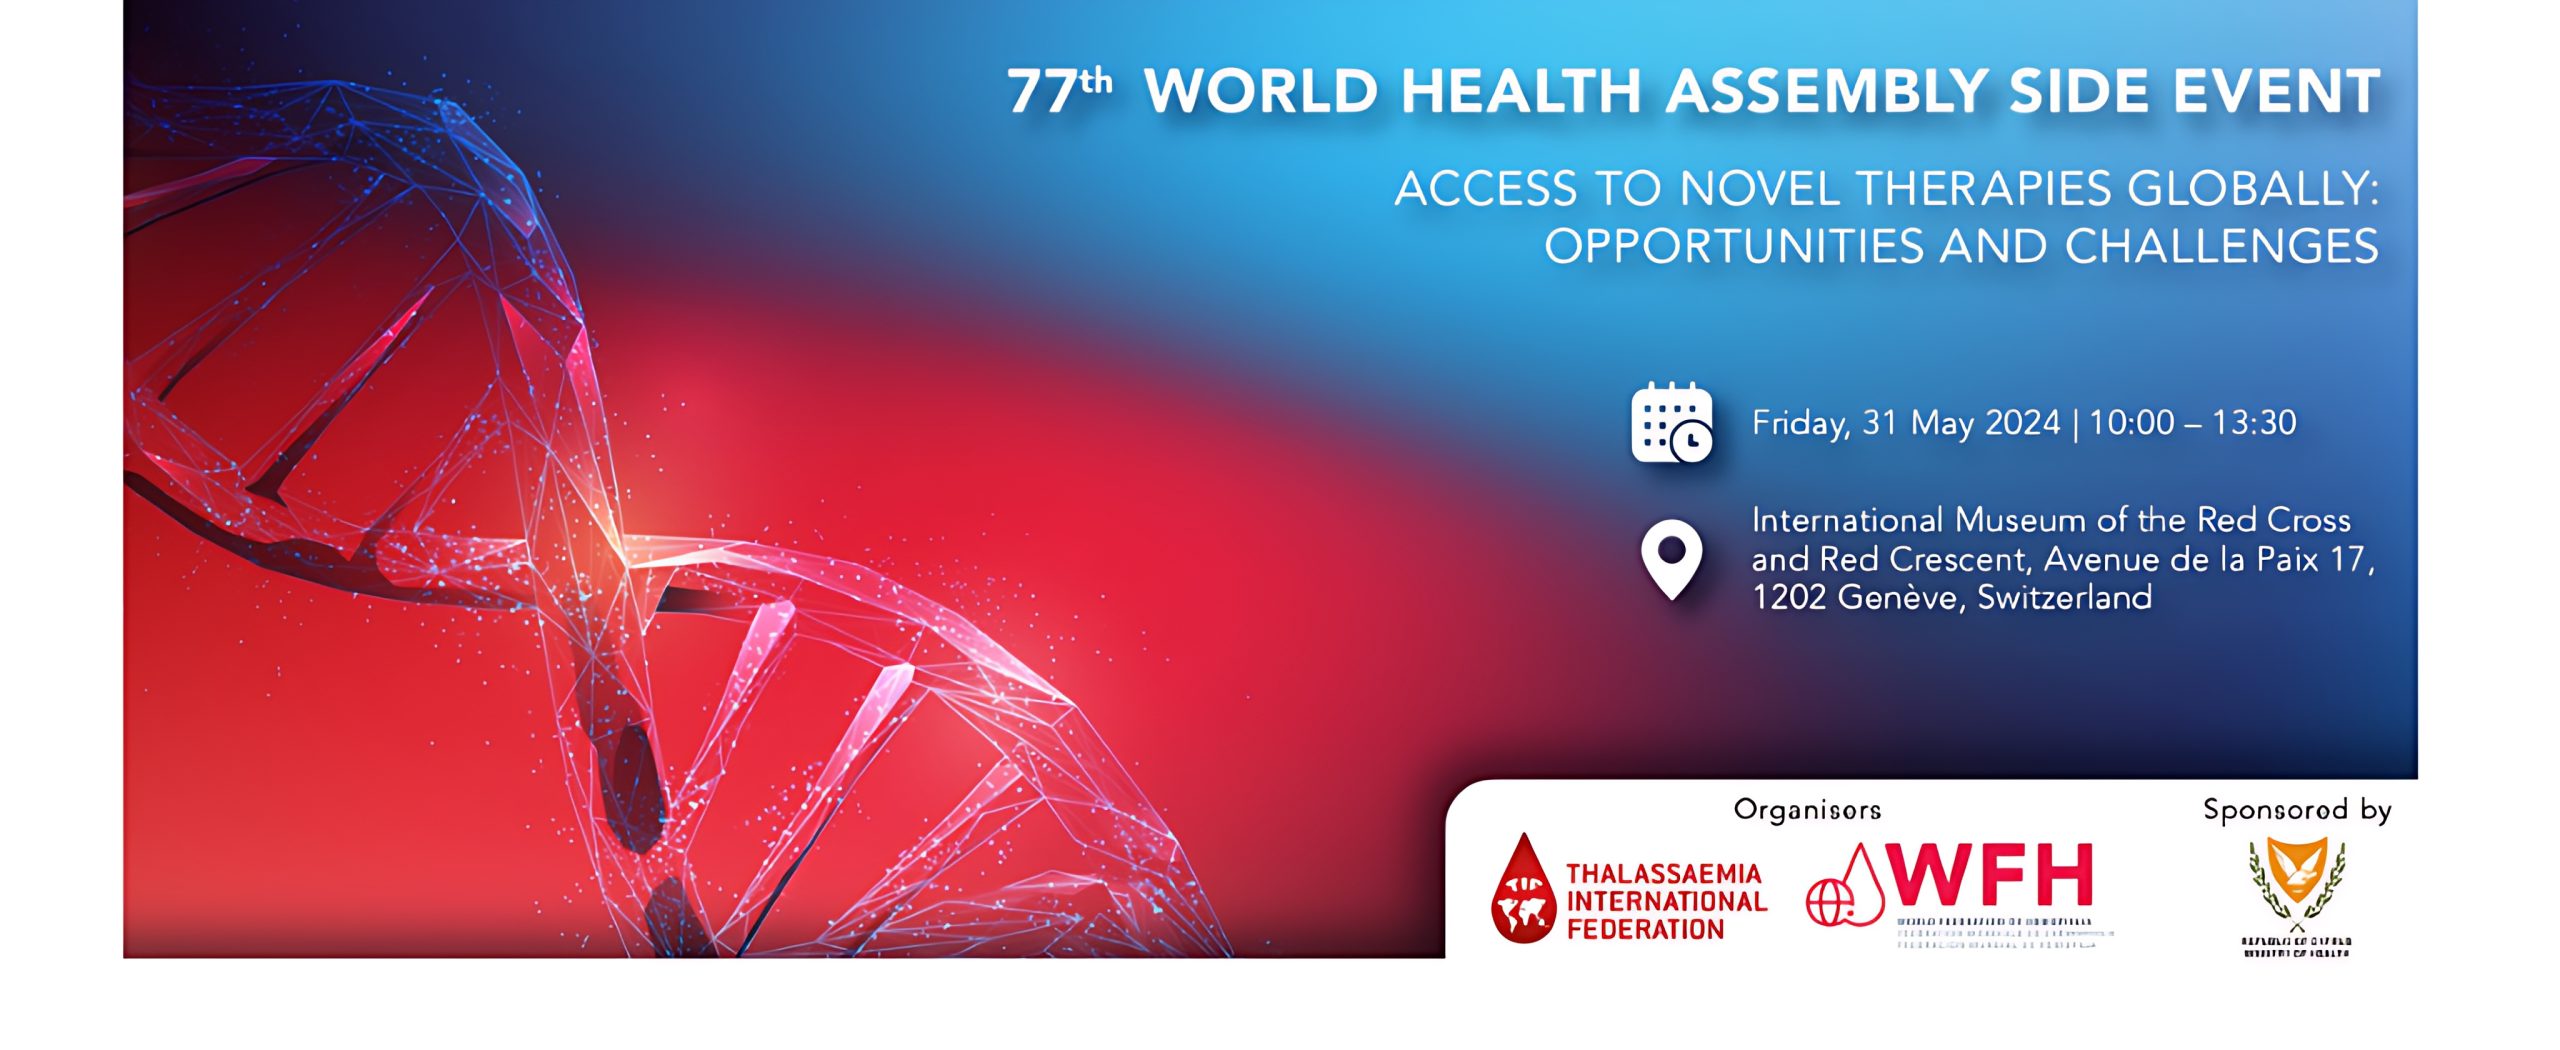 WHA77 SIDE EVENT | Access to Novel Therapies Globally